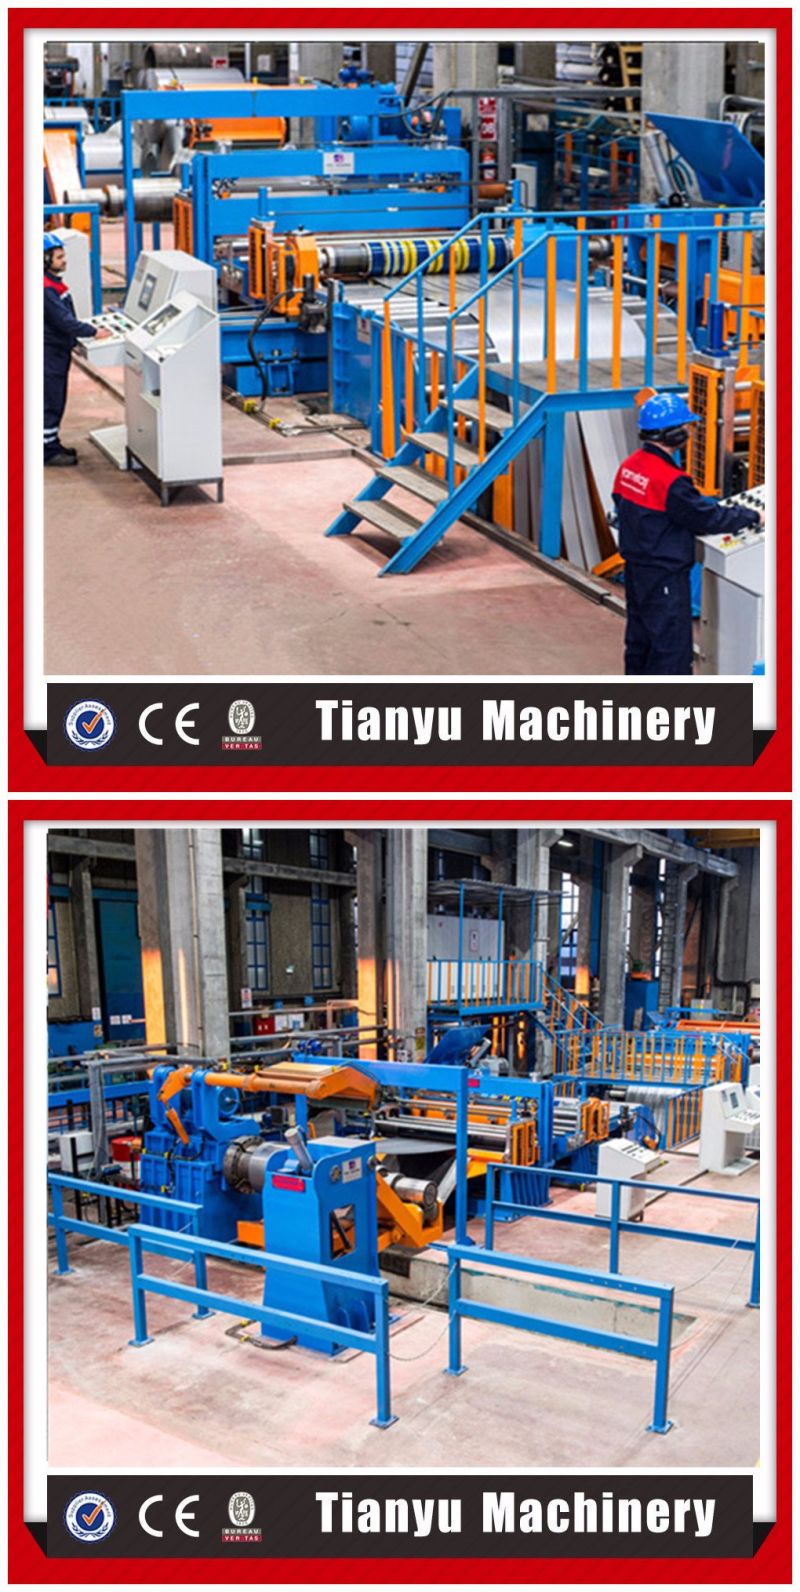  CNC Thin Plate Uncoiling Cut to Length and Slitting Line Machine 